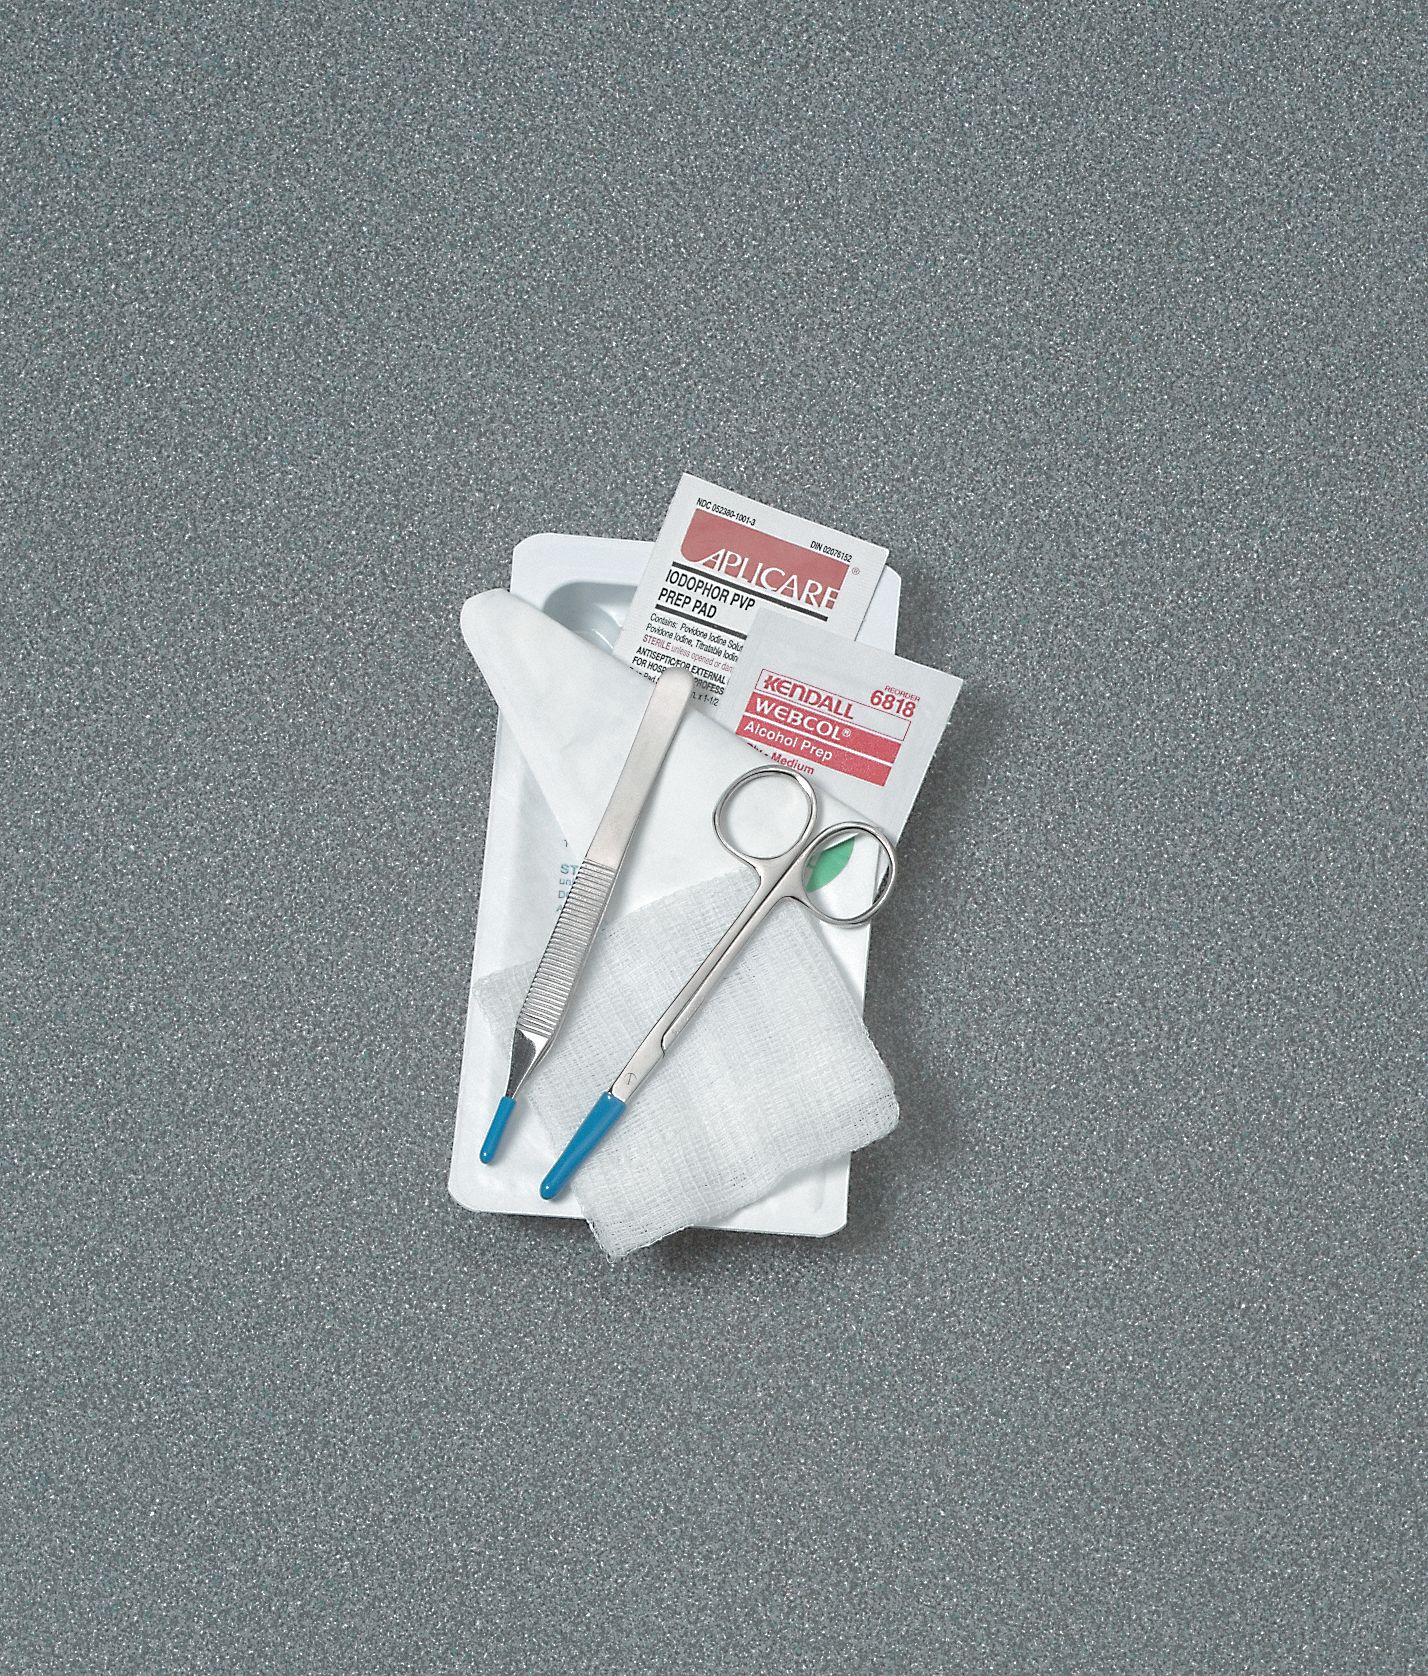 3RUP4 - Suture Removal Kit